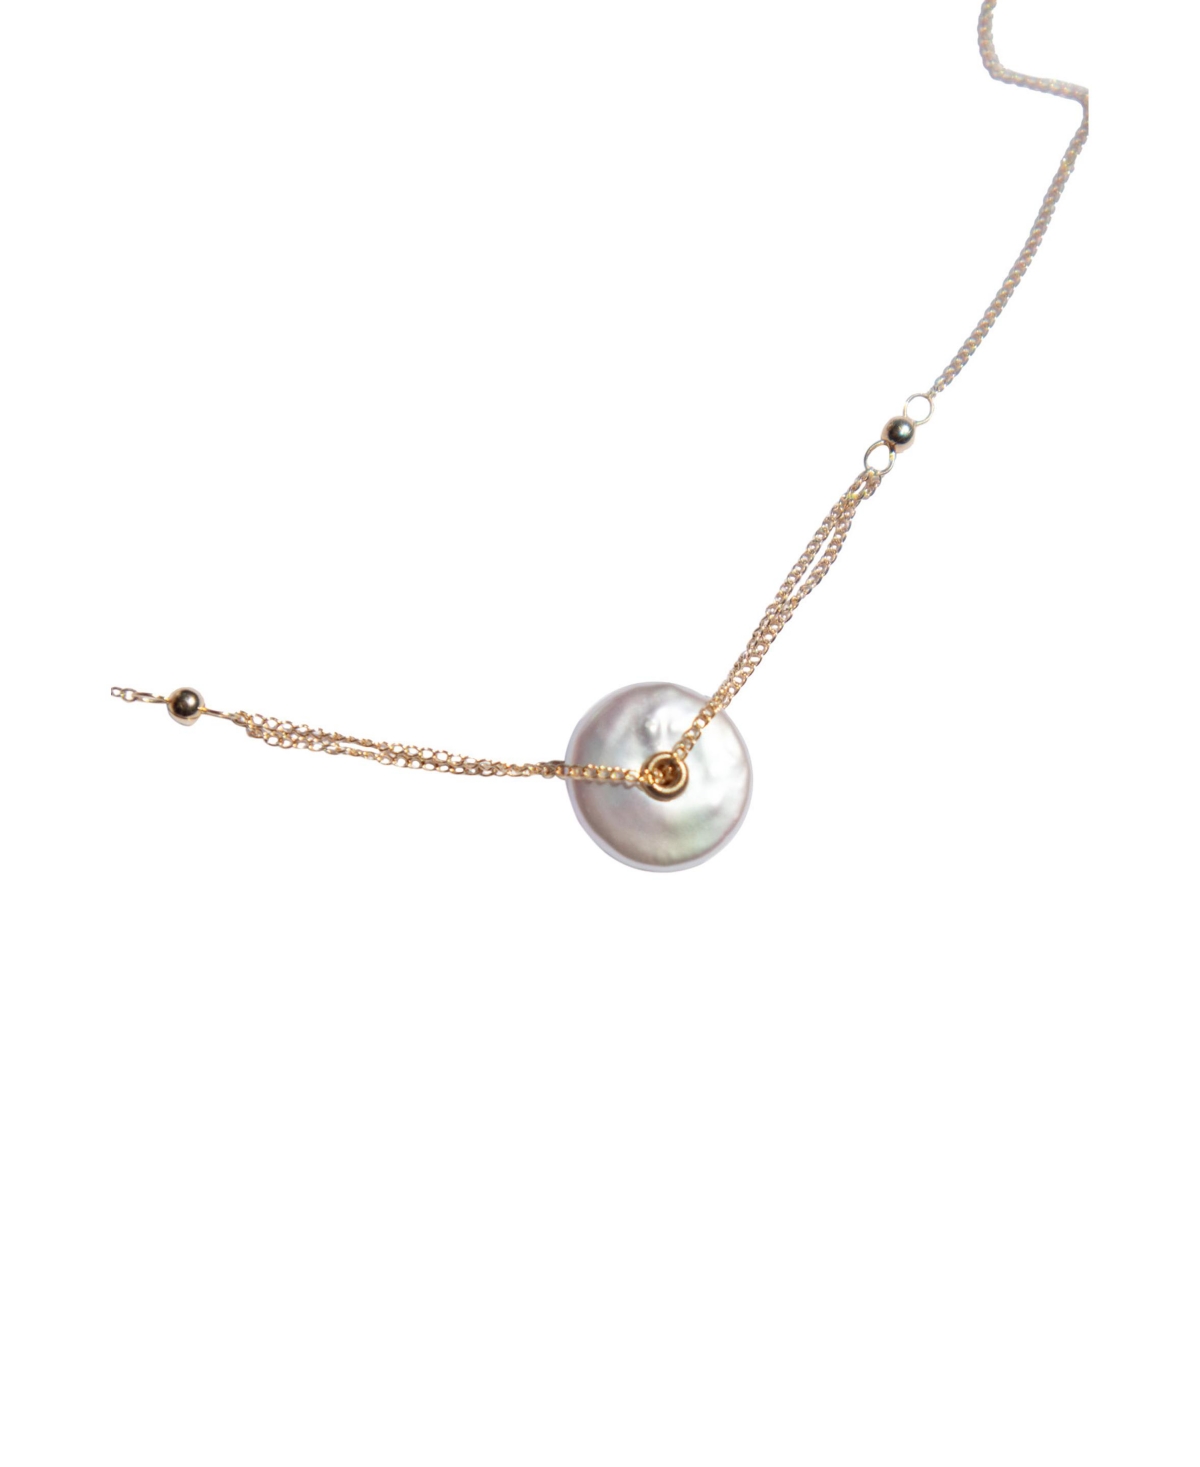 Mabel - pendant pearl necklace - White